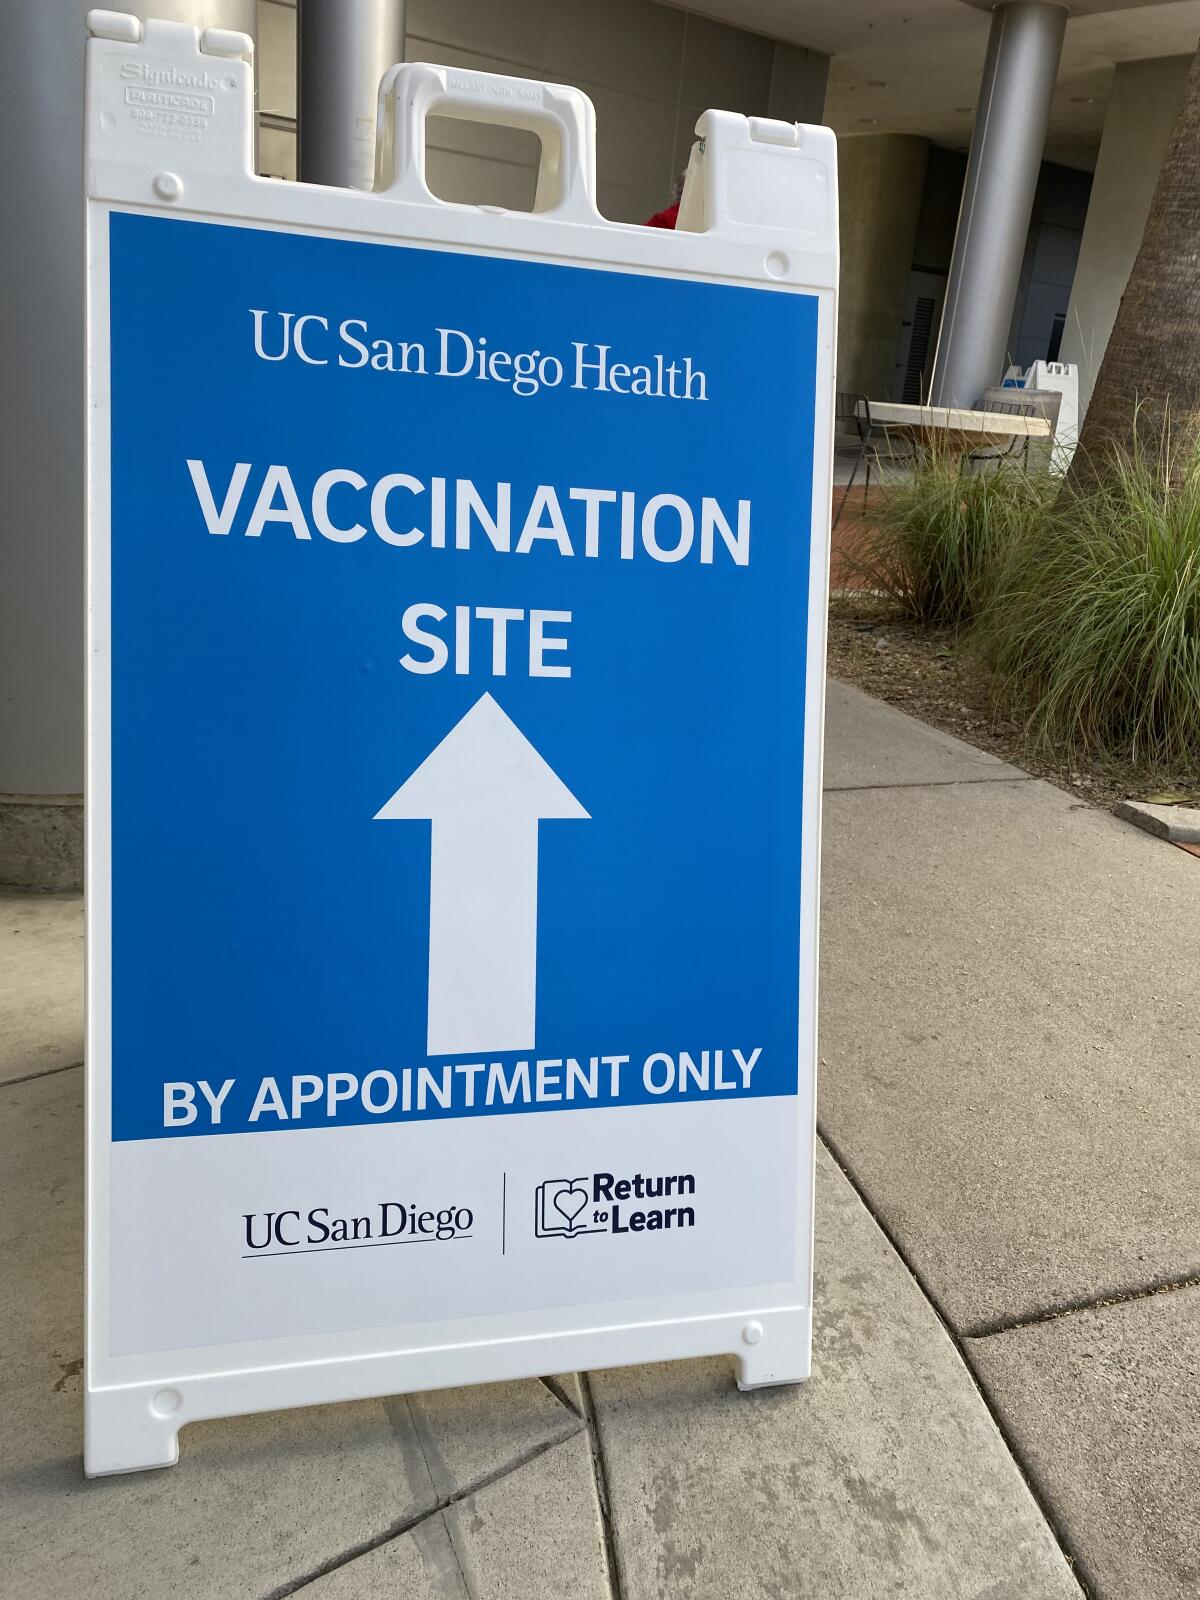 A sign directs people to UC San Diego's new COVID-19 vaccination superstation at the RIMAC arena on campus.